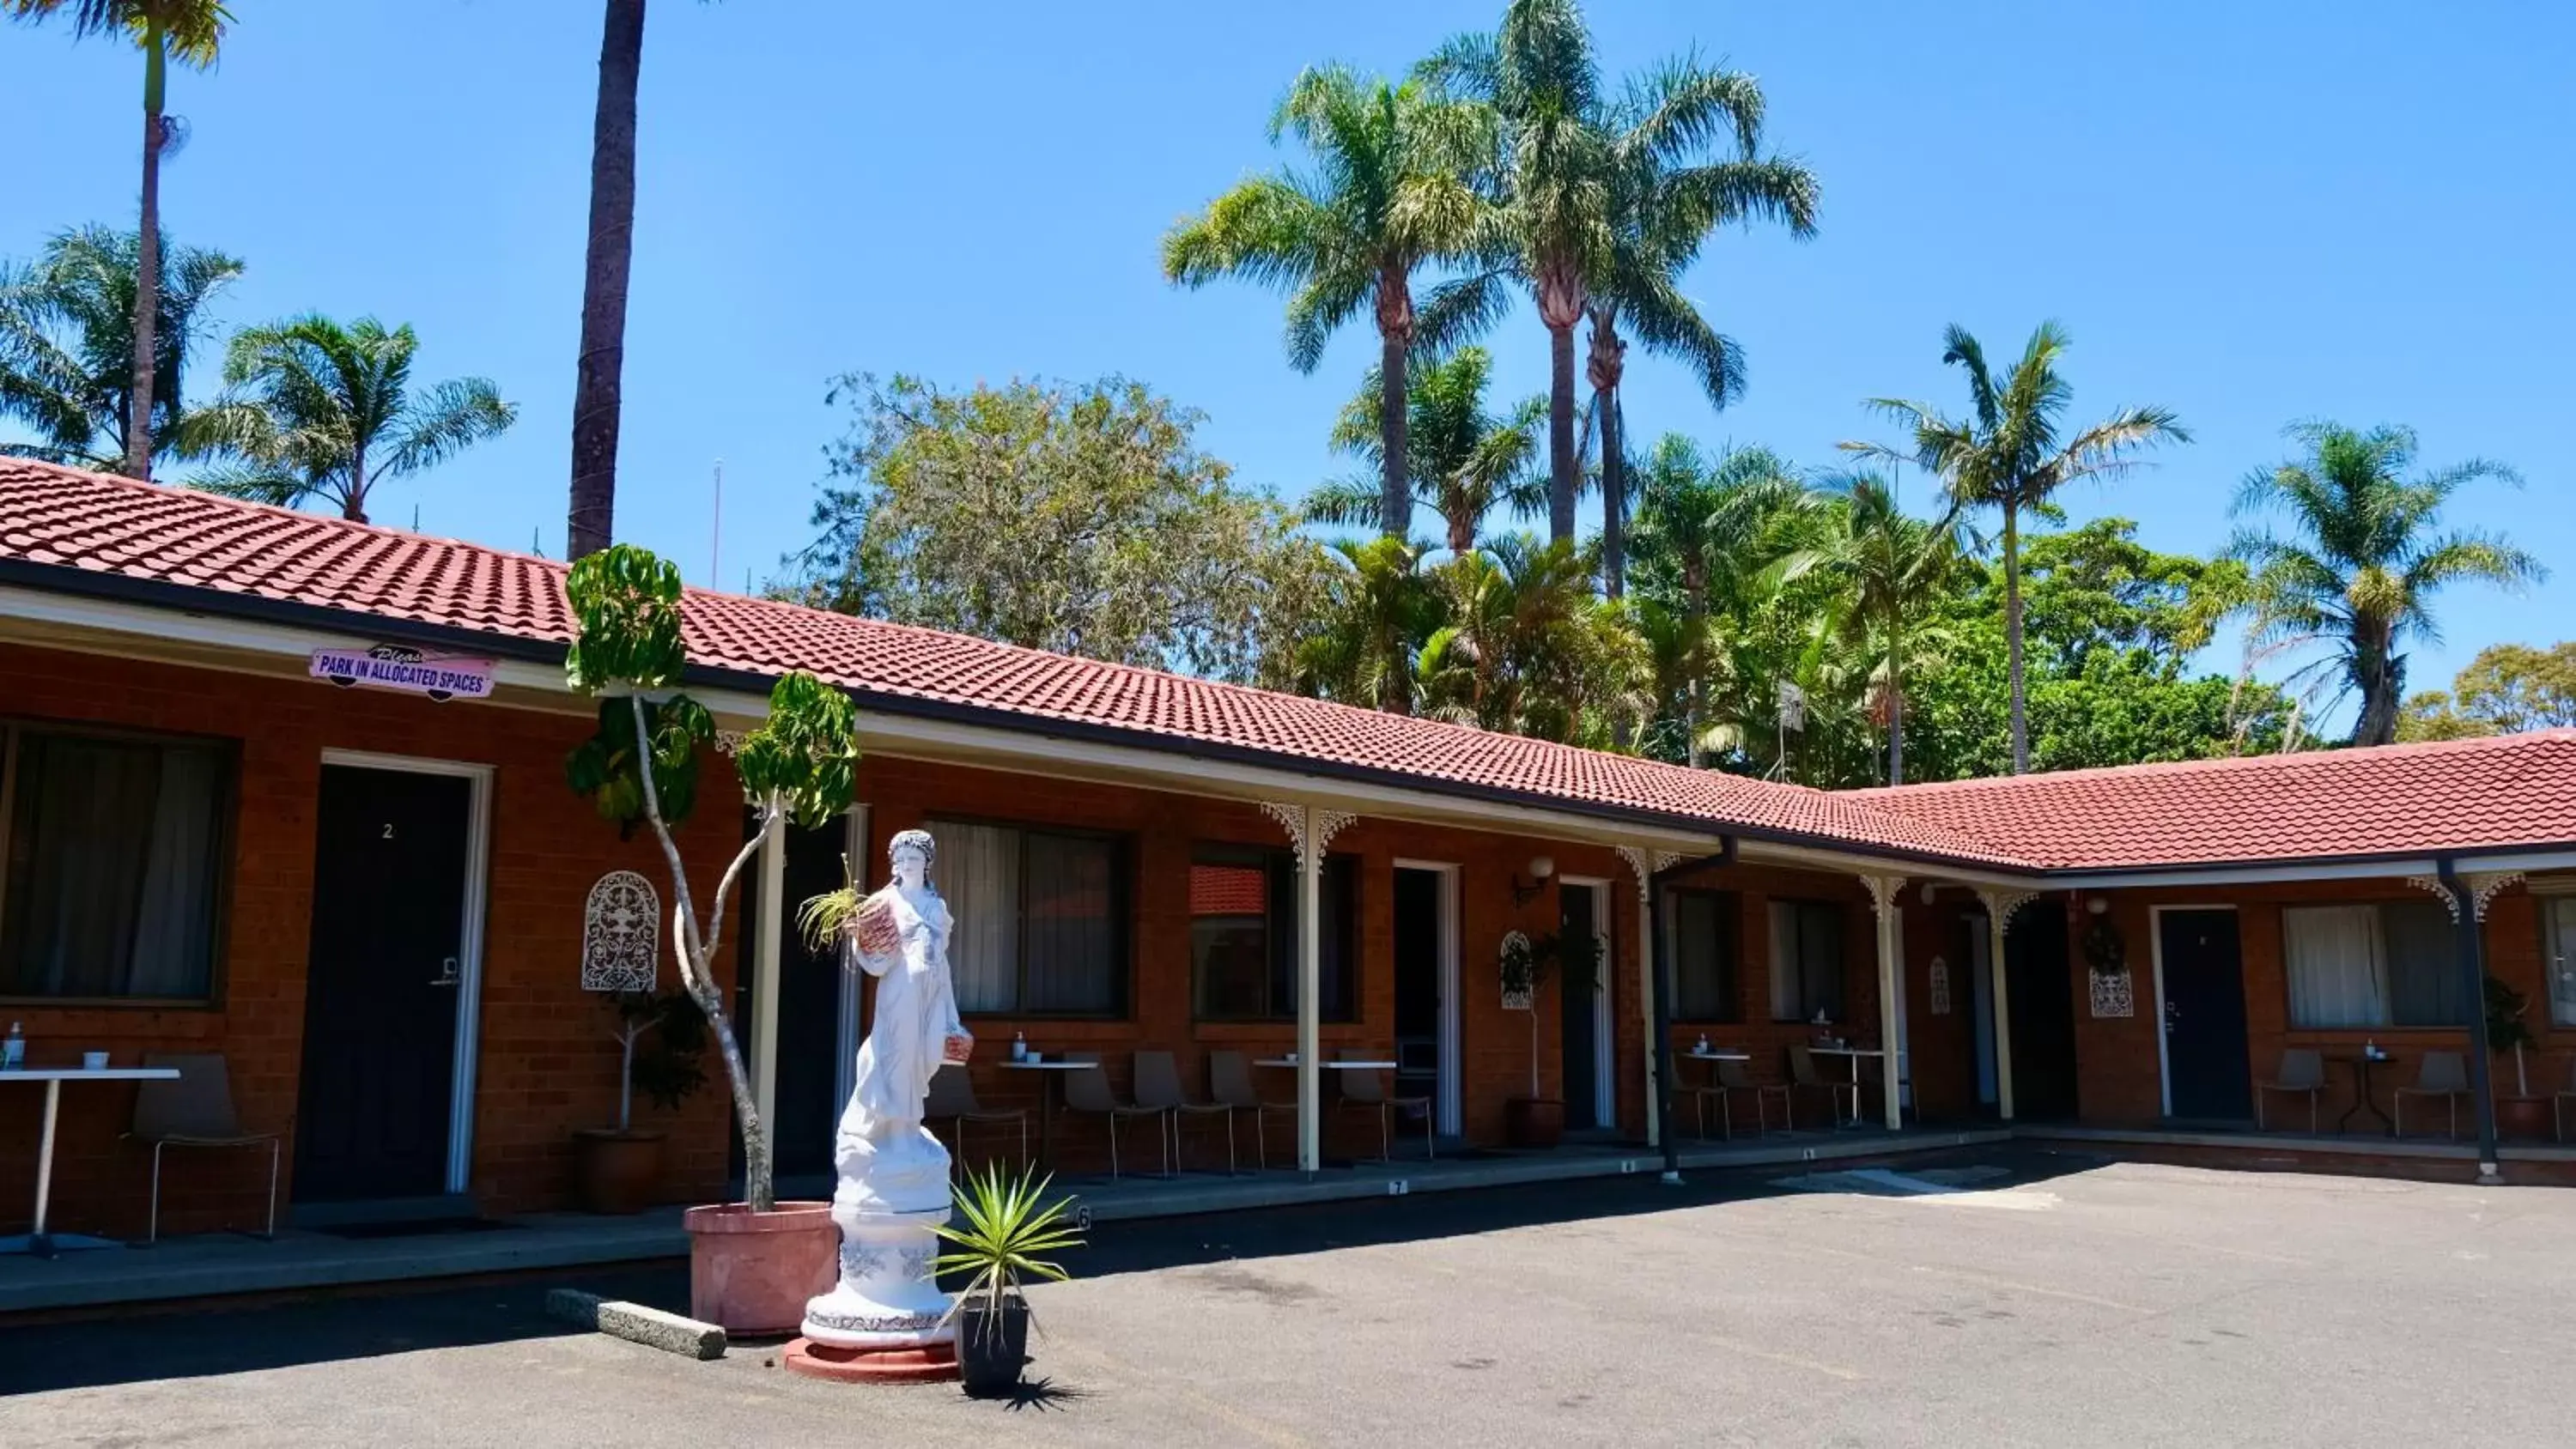 Property Building in Sapphire Palms Motel